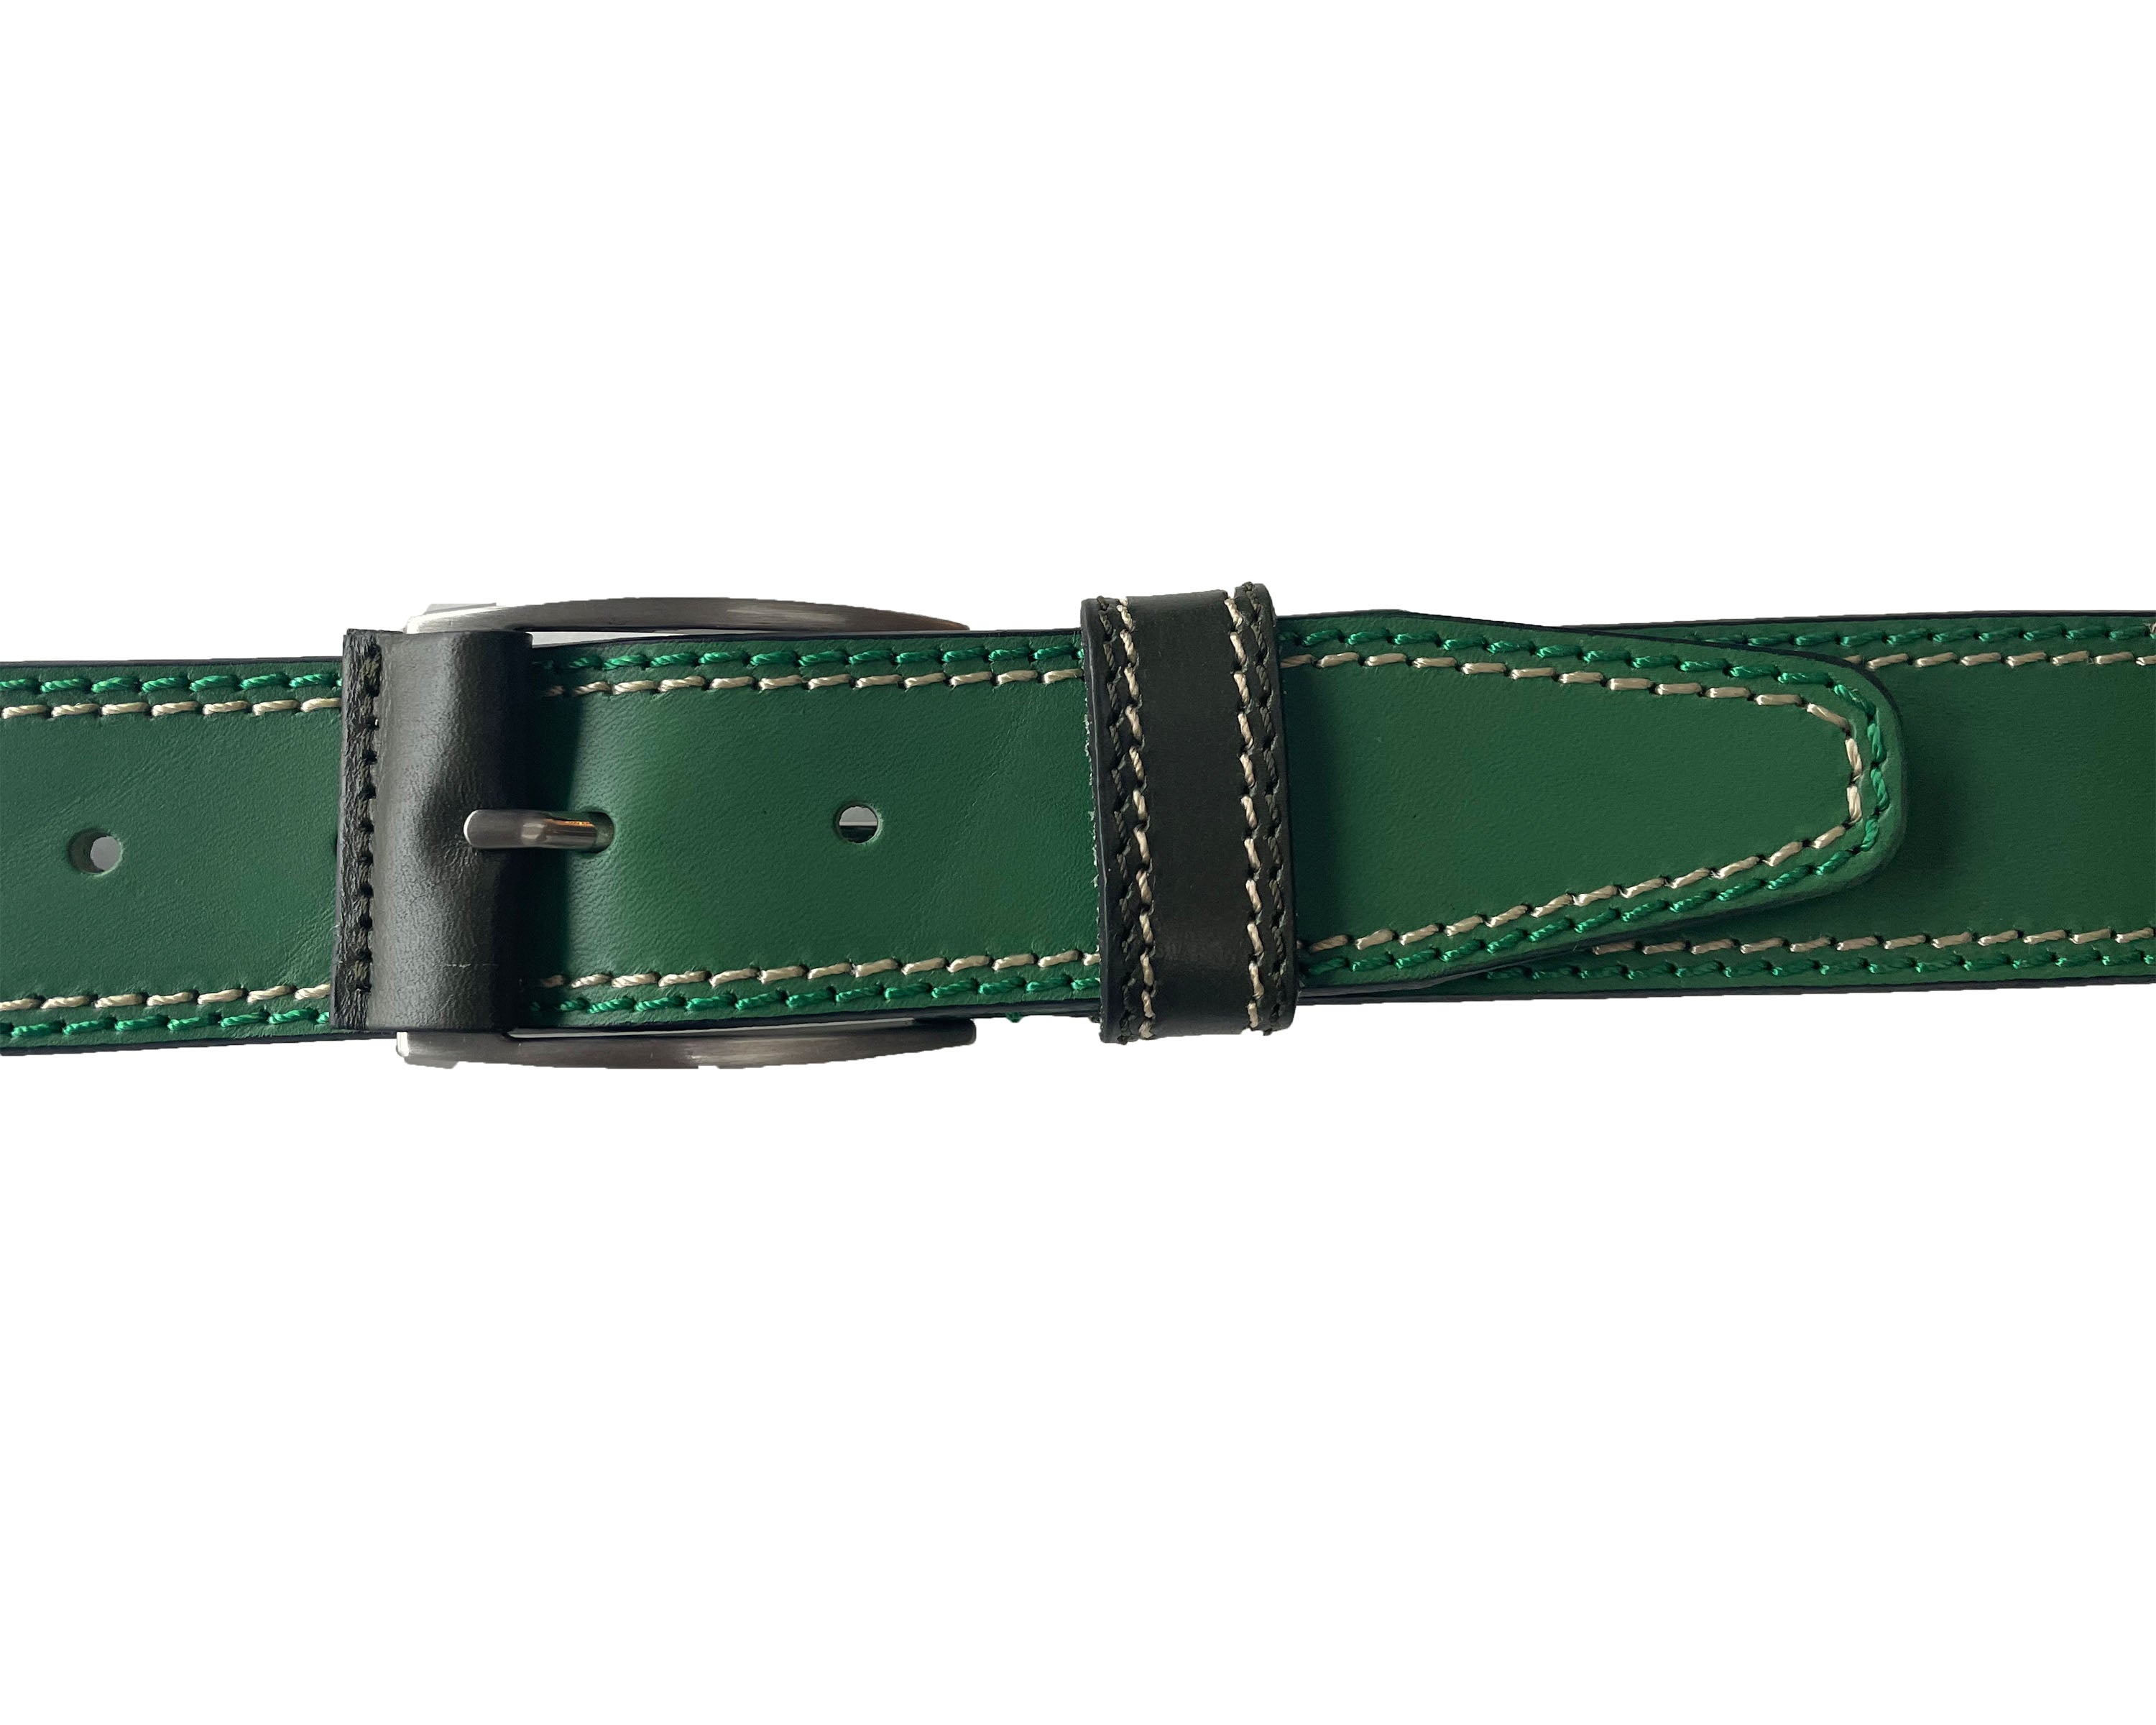 GREEN 40MM CONTRAST DOUBLE STITCHED HIDE LEATHER BELT